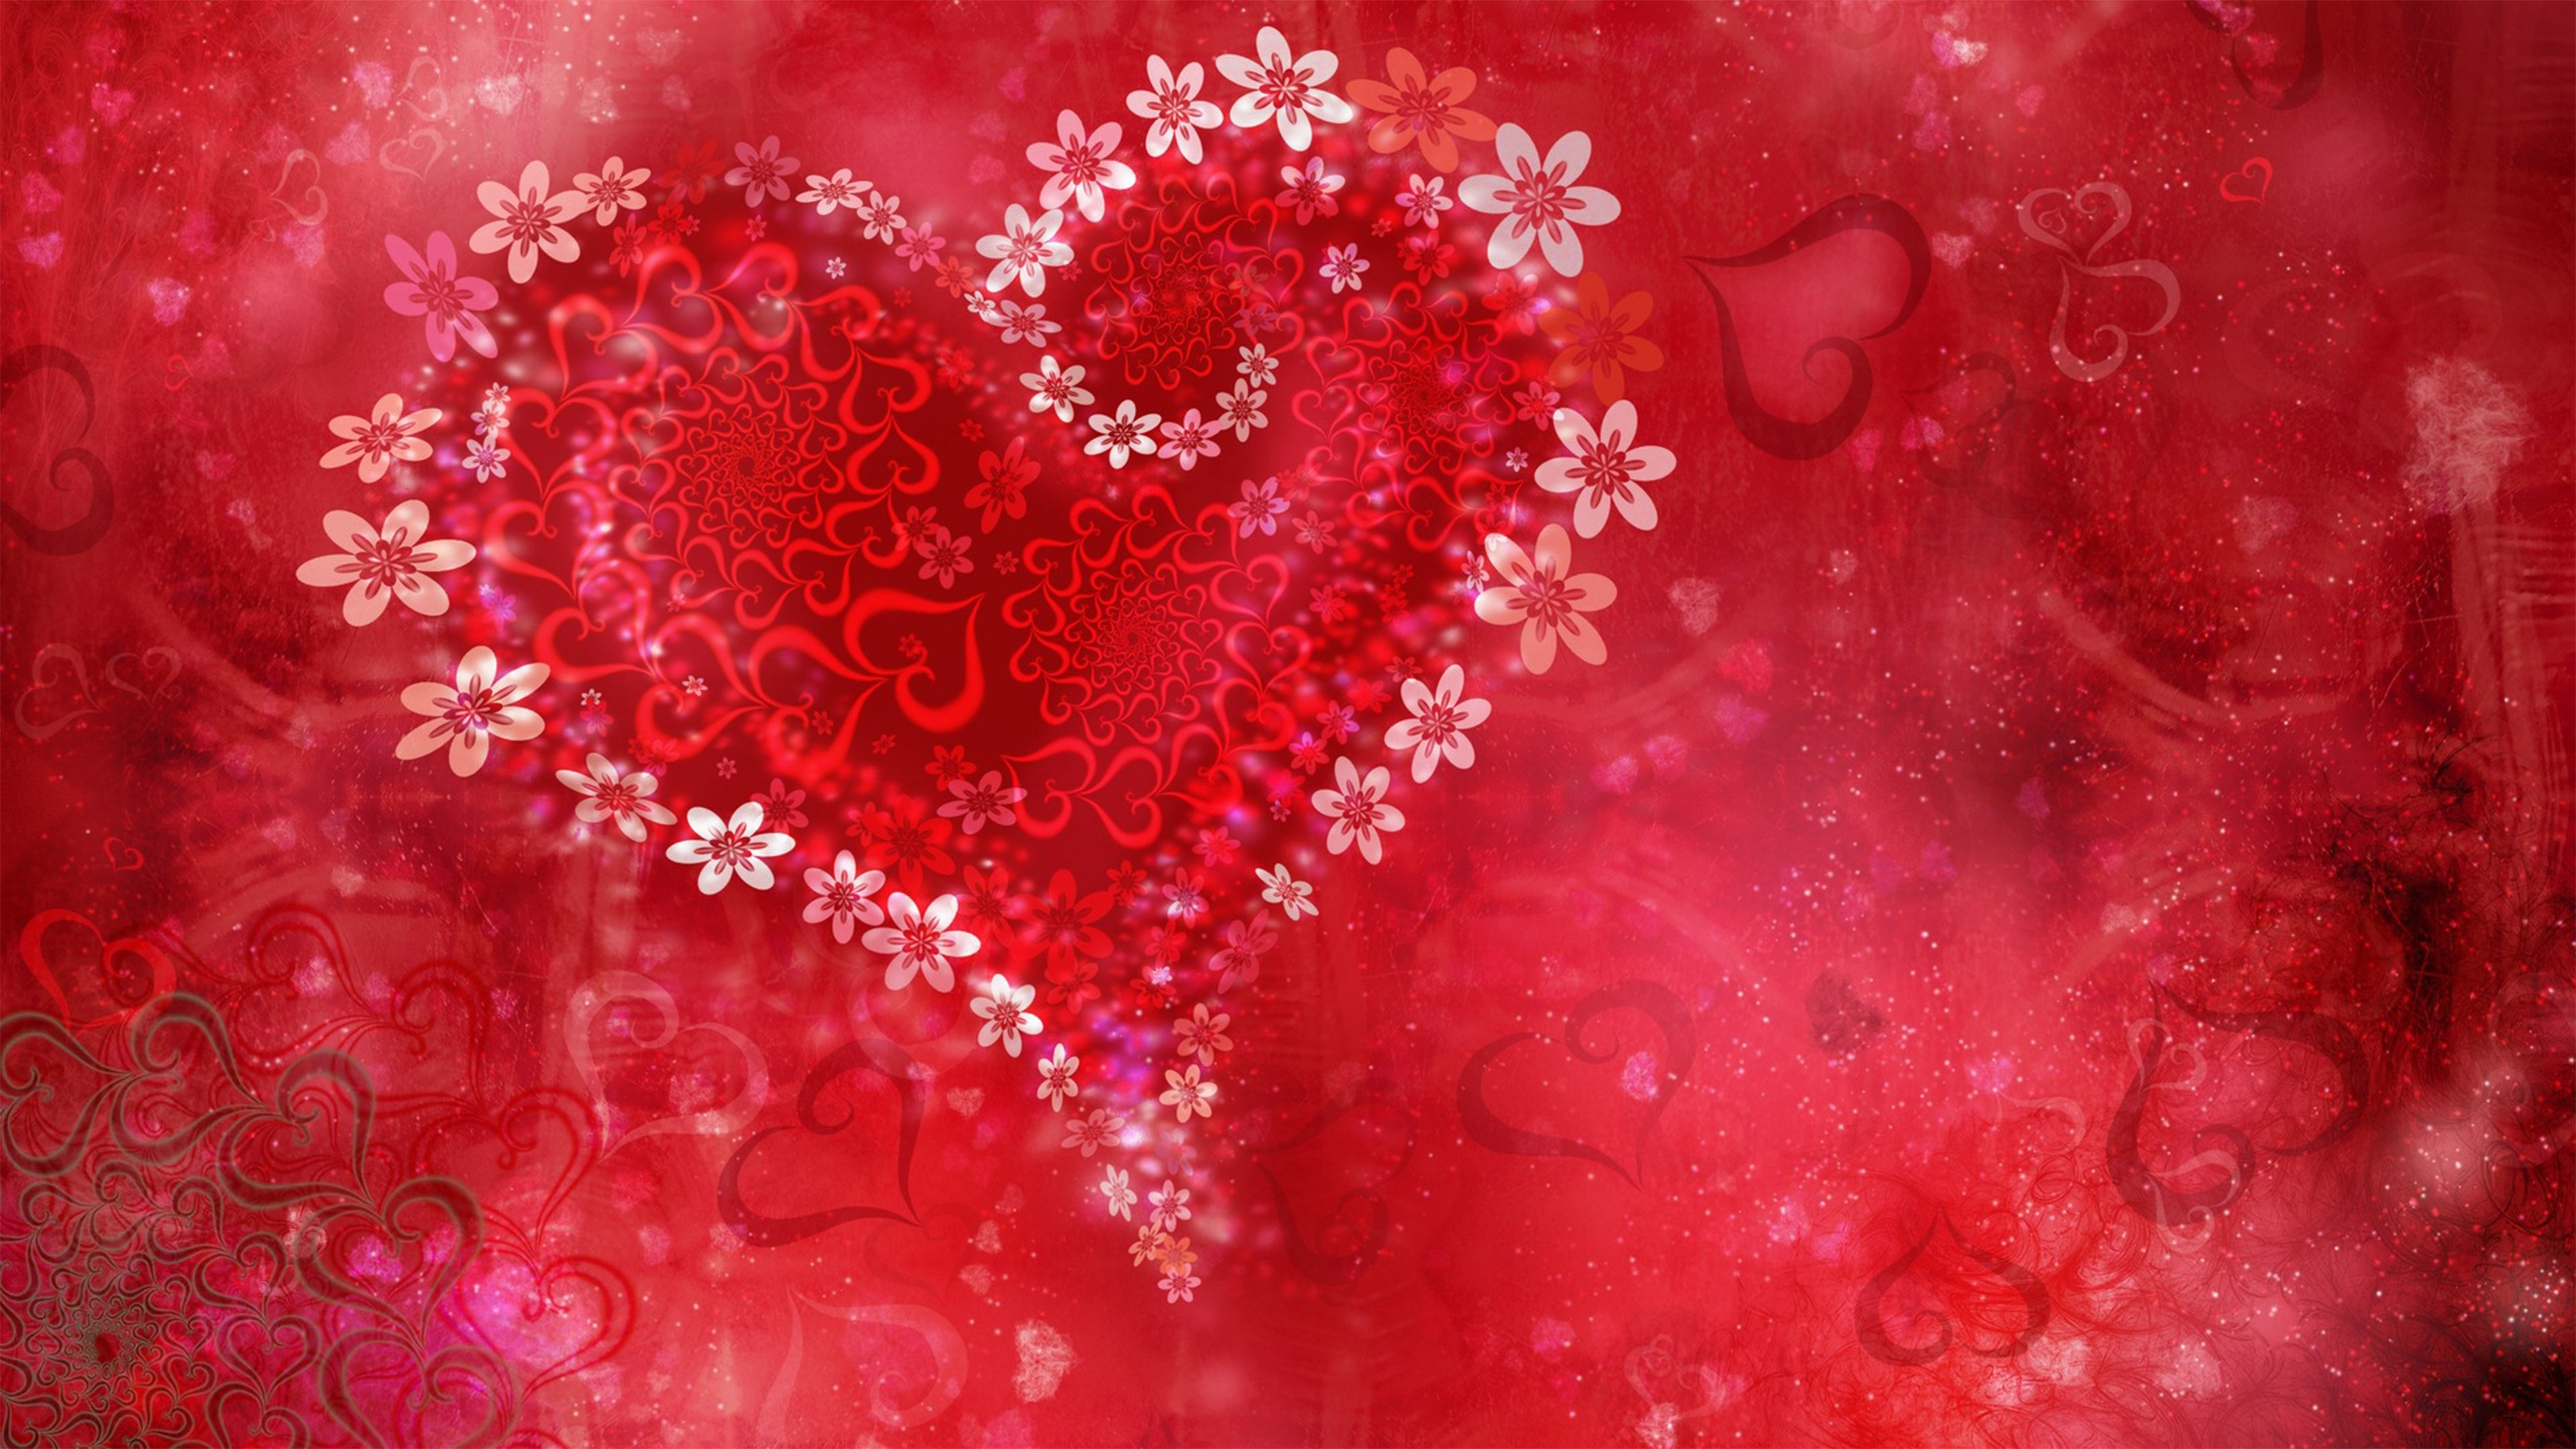 3840x2160 2560x1440 Valentine Day Heart 4k 1440P Resolution HD 4k Wallpapers, Images, Backgrounds, Photos and Pictures